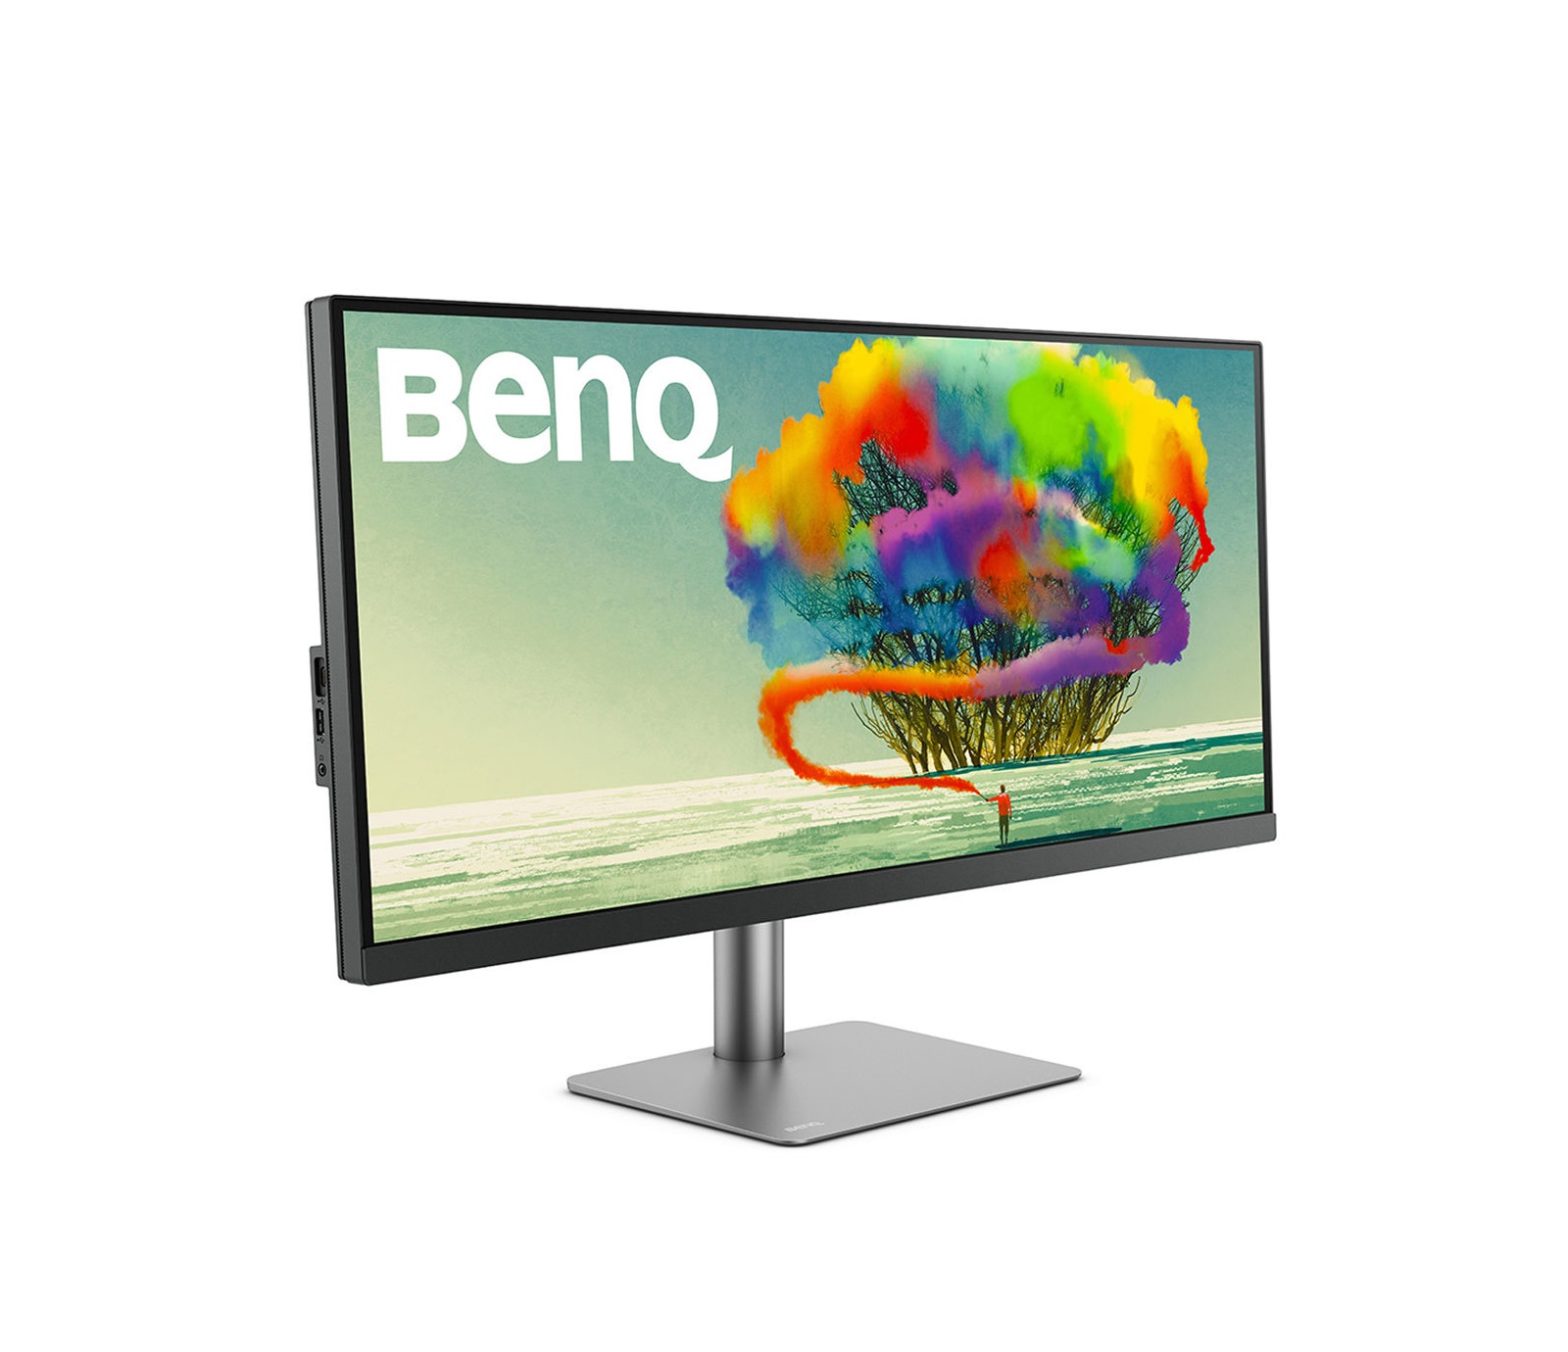 BenQ PD3420 LCD Monitor User Guide